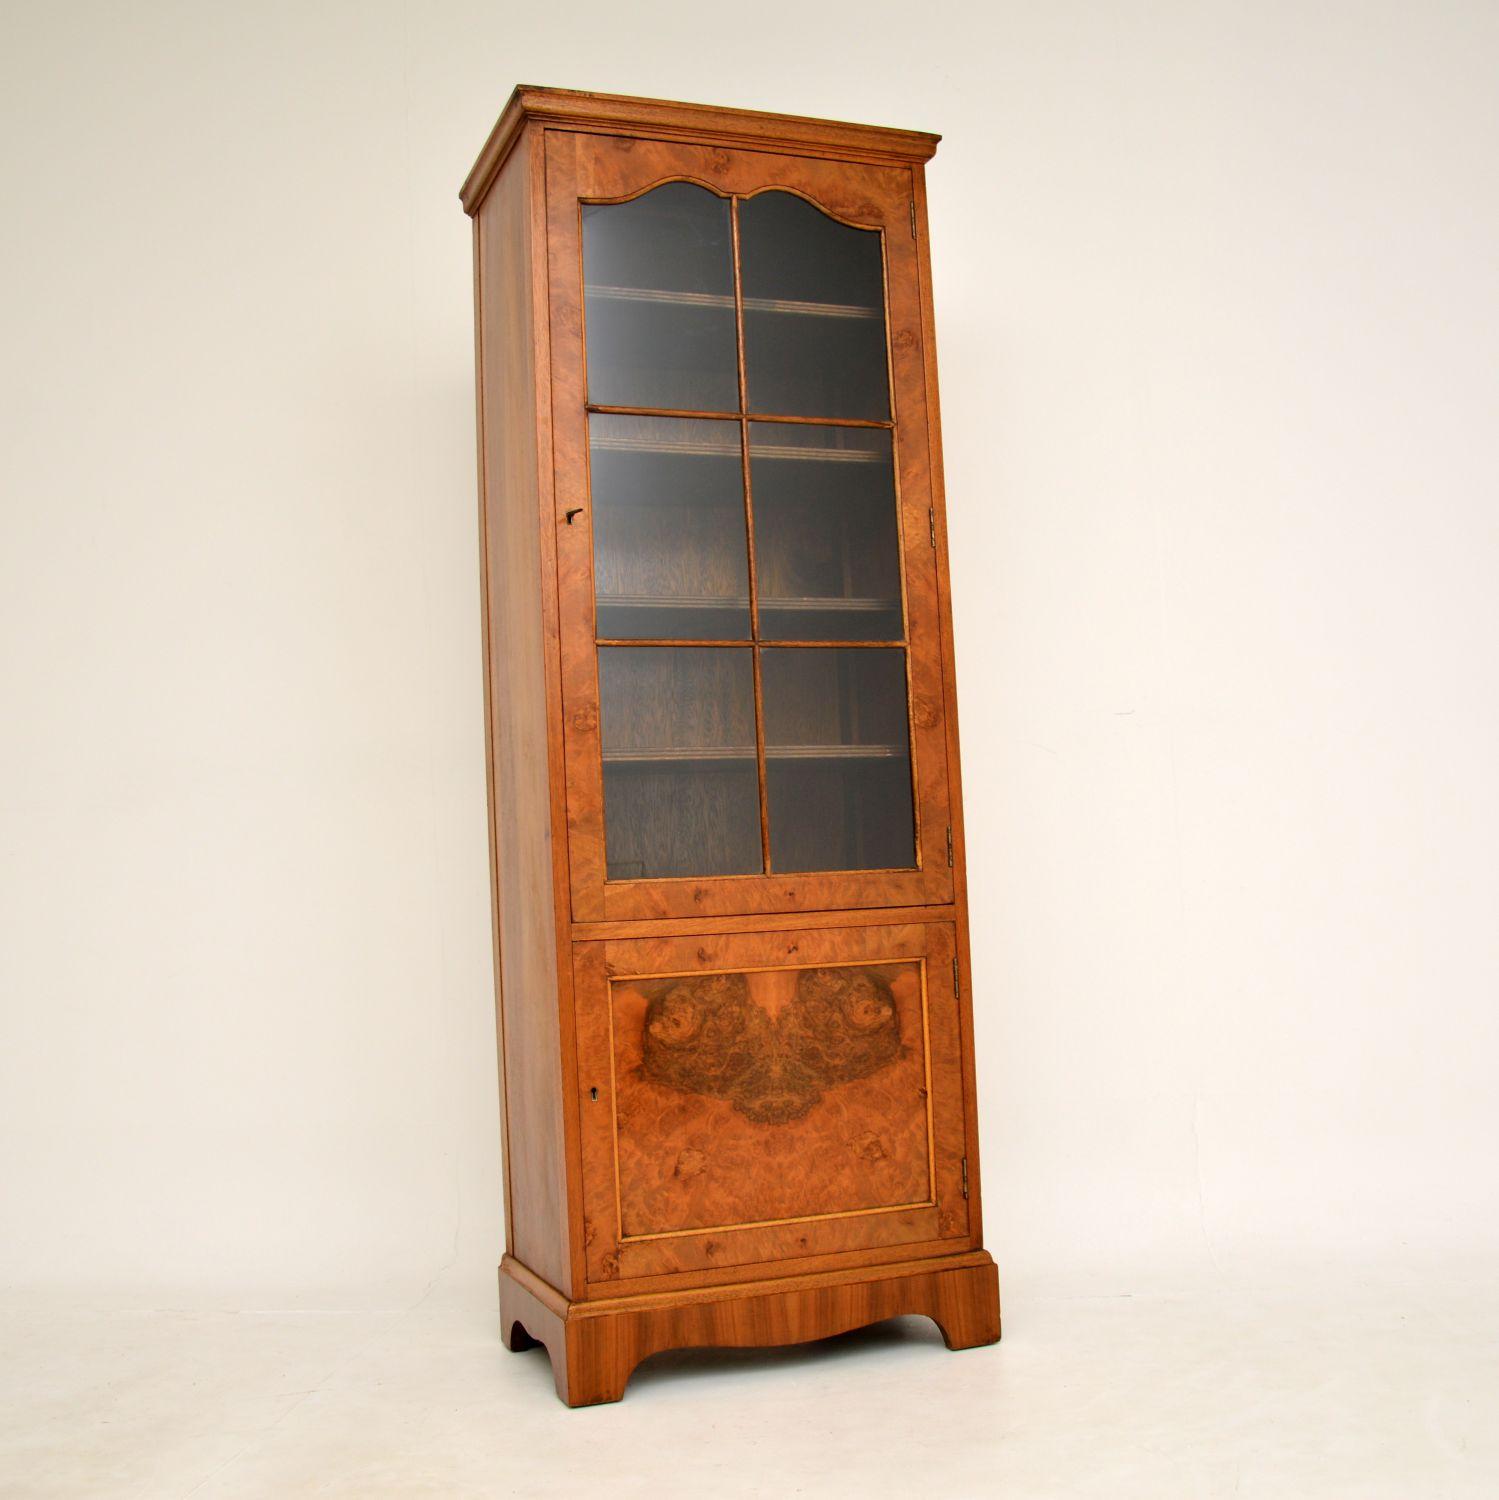 An excellent antique walnut bookcase of lovely proportions. This was made in England, it dates from around the 1930’s period.

It is a very useful size, tall and slim, offering lots of storage space while taking up little floor space. The astral